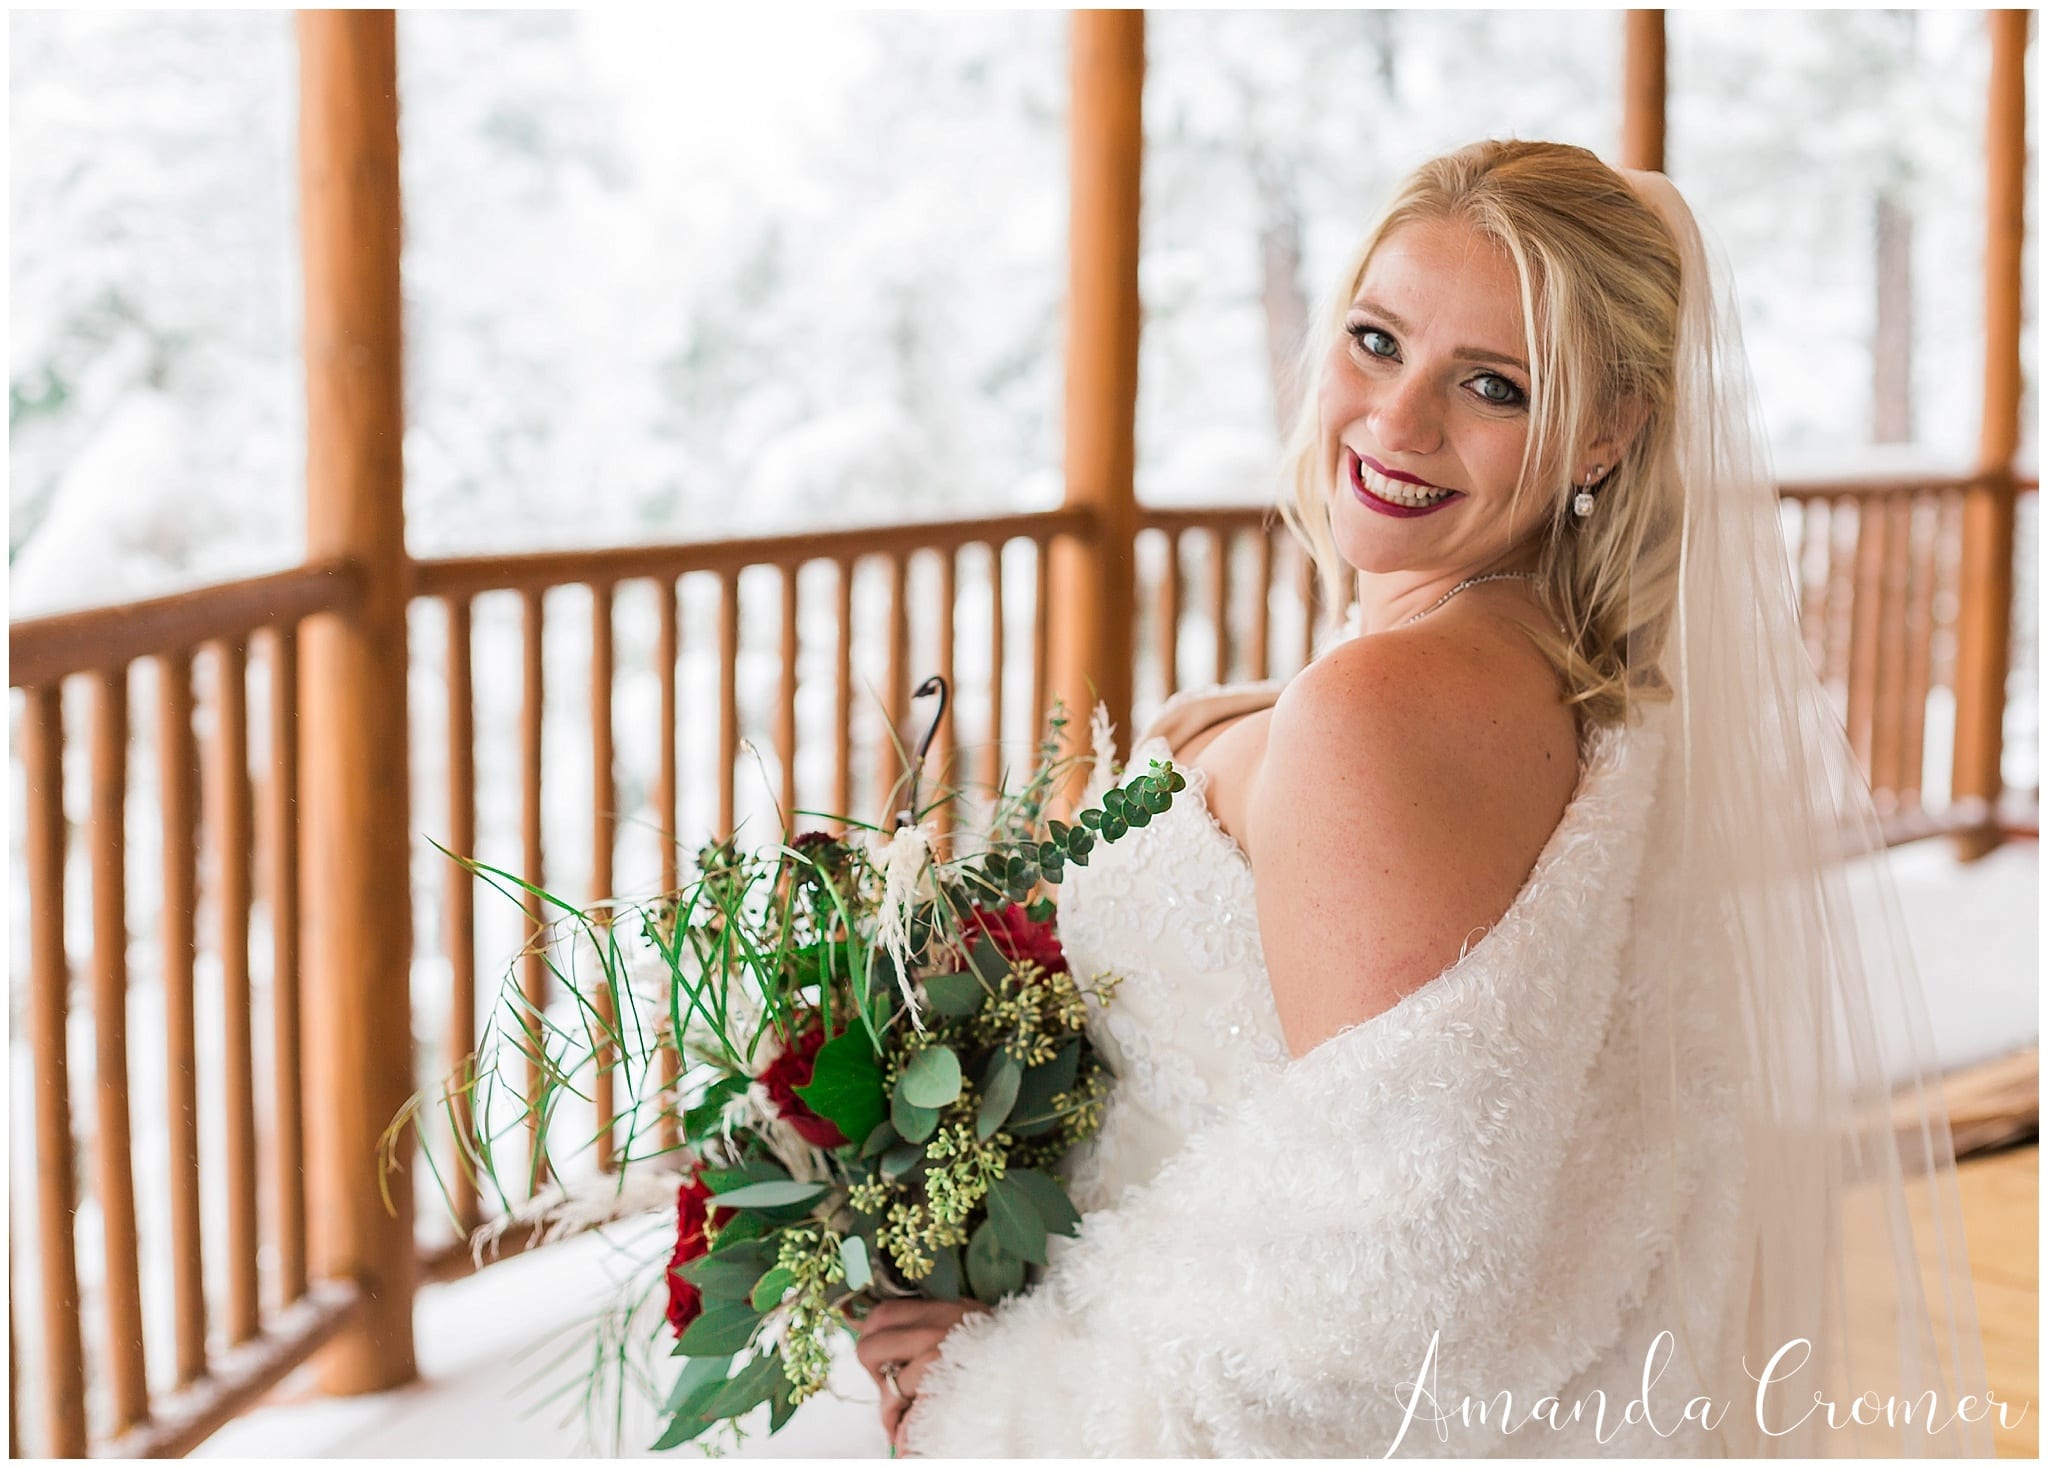 Snow Wedding | Narnia Themed Wedding | Bride with bouquet